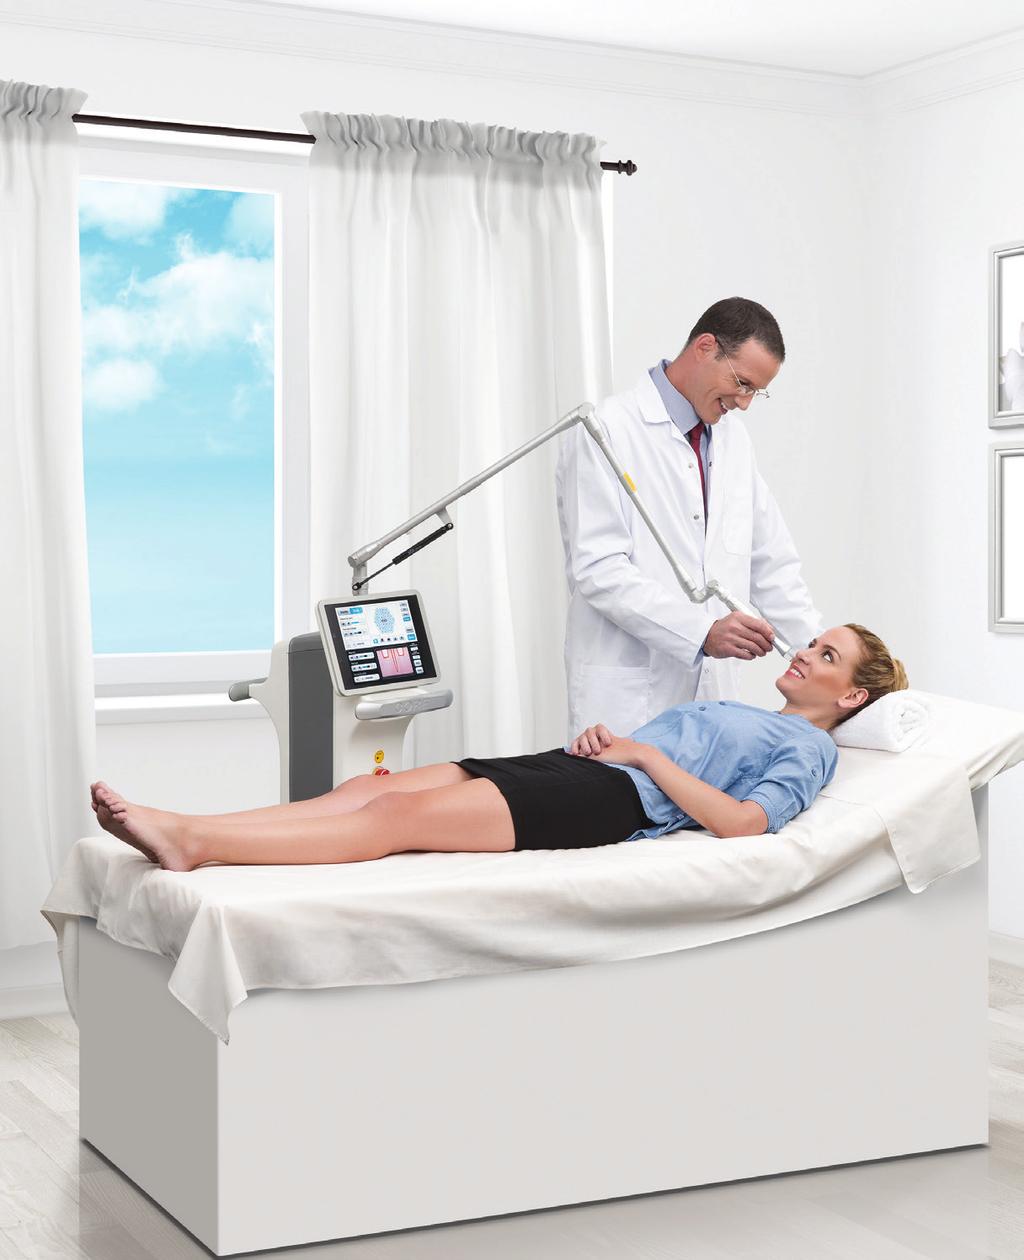 Along the way, Syneron Candela has led the way in innovations that give practices the power to deliver high-demand treatments to an ever-expanding patient base.